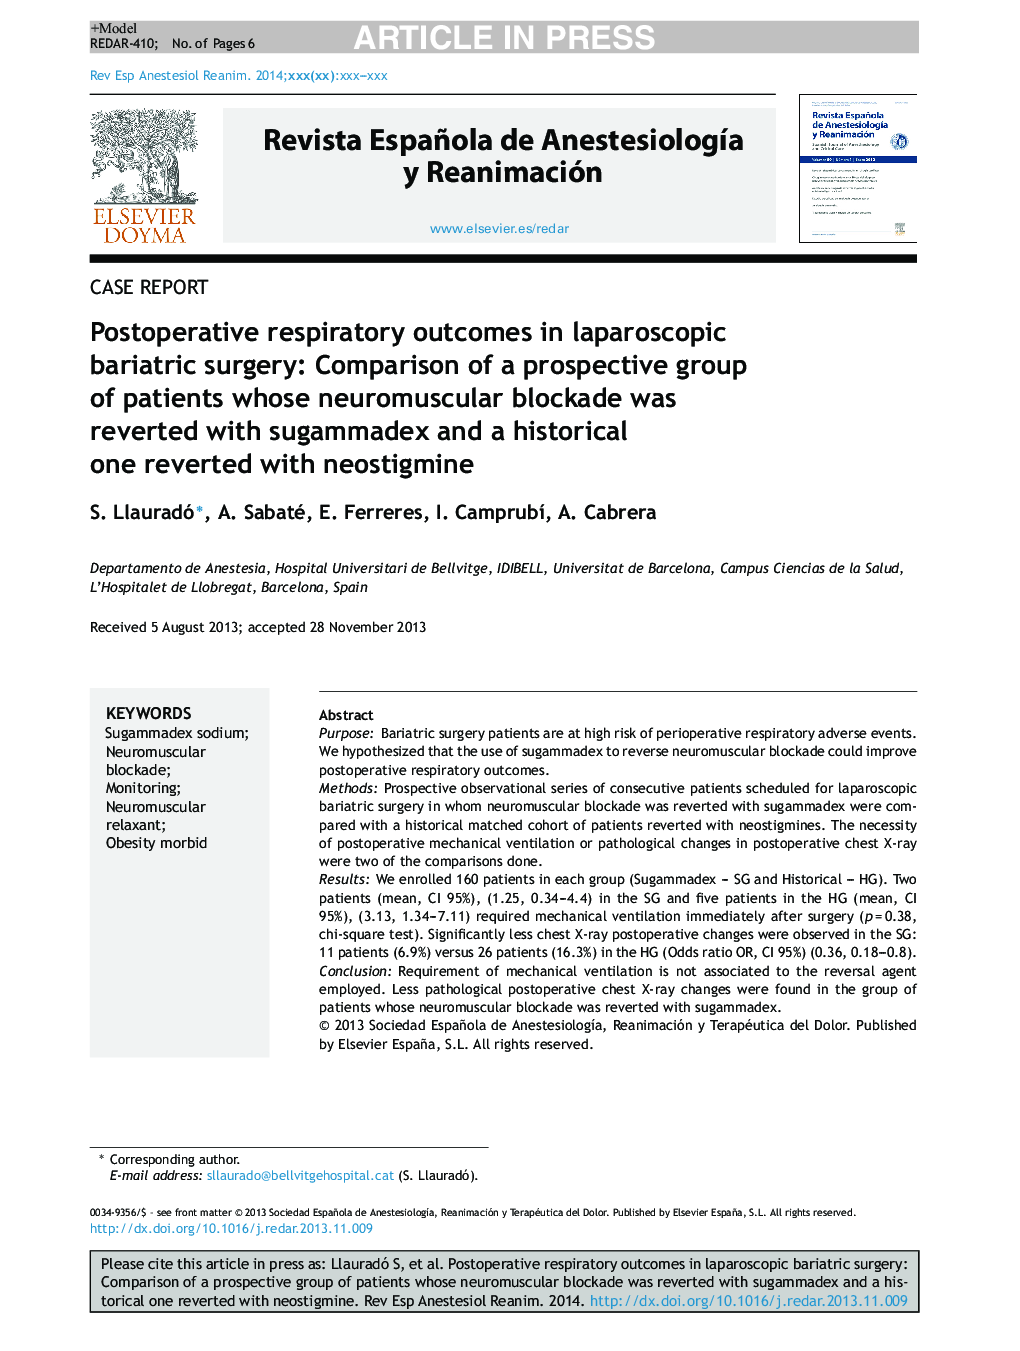 Postoperative respiratory outcomes in laparoscopic bariatric surgery: Comparison of a prospective group of patients whose neuromuscular blockade was reverted with sugammadex and a historical one reverted with neostigmine